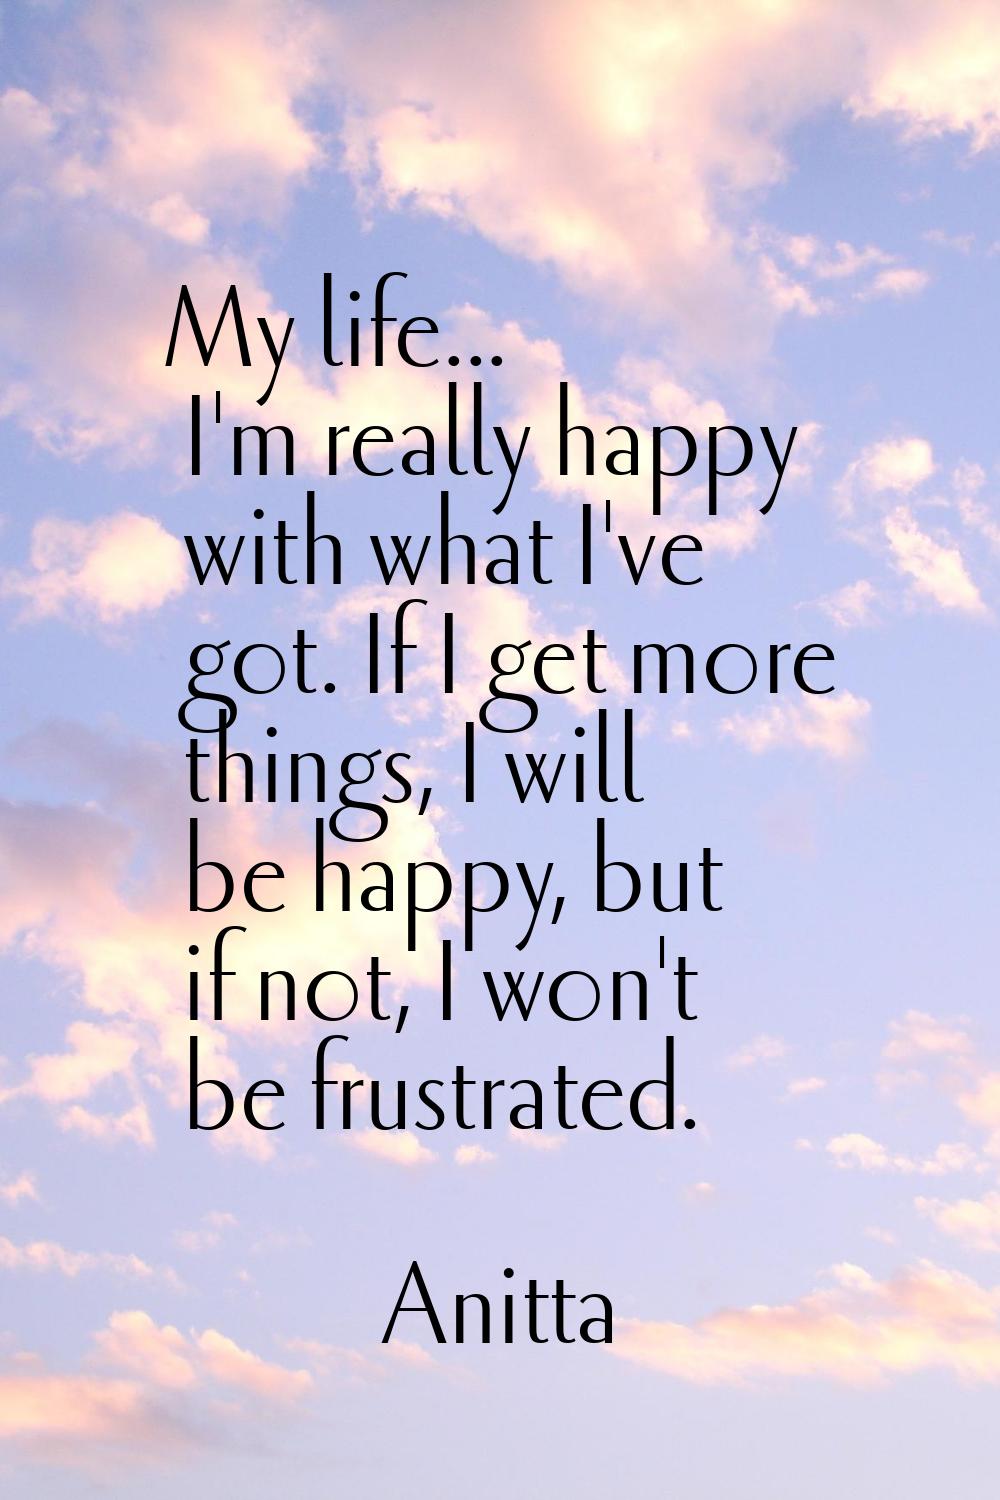 My life... I'm really happy with what I've got. If I get more things, I will be happy, but if not, 